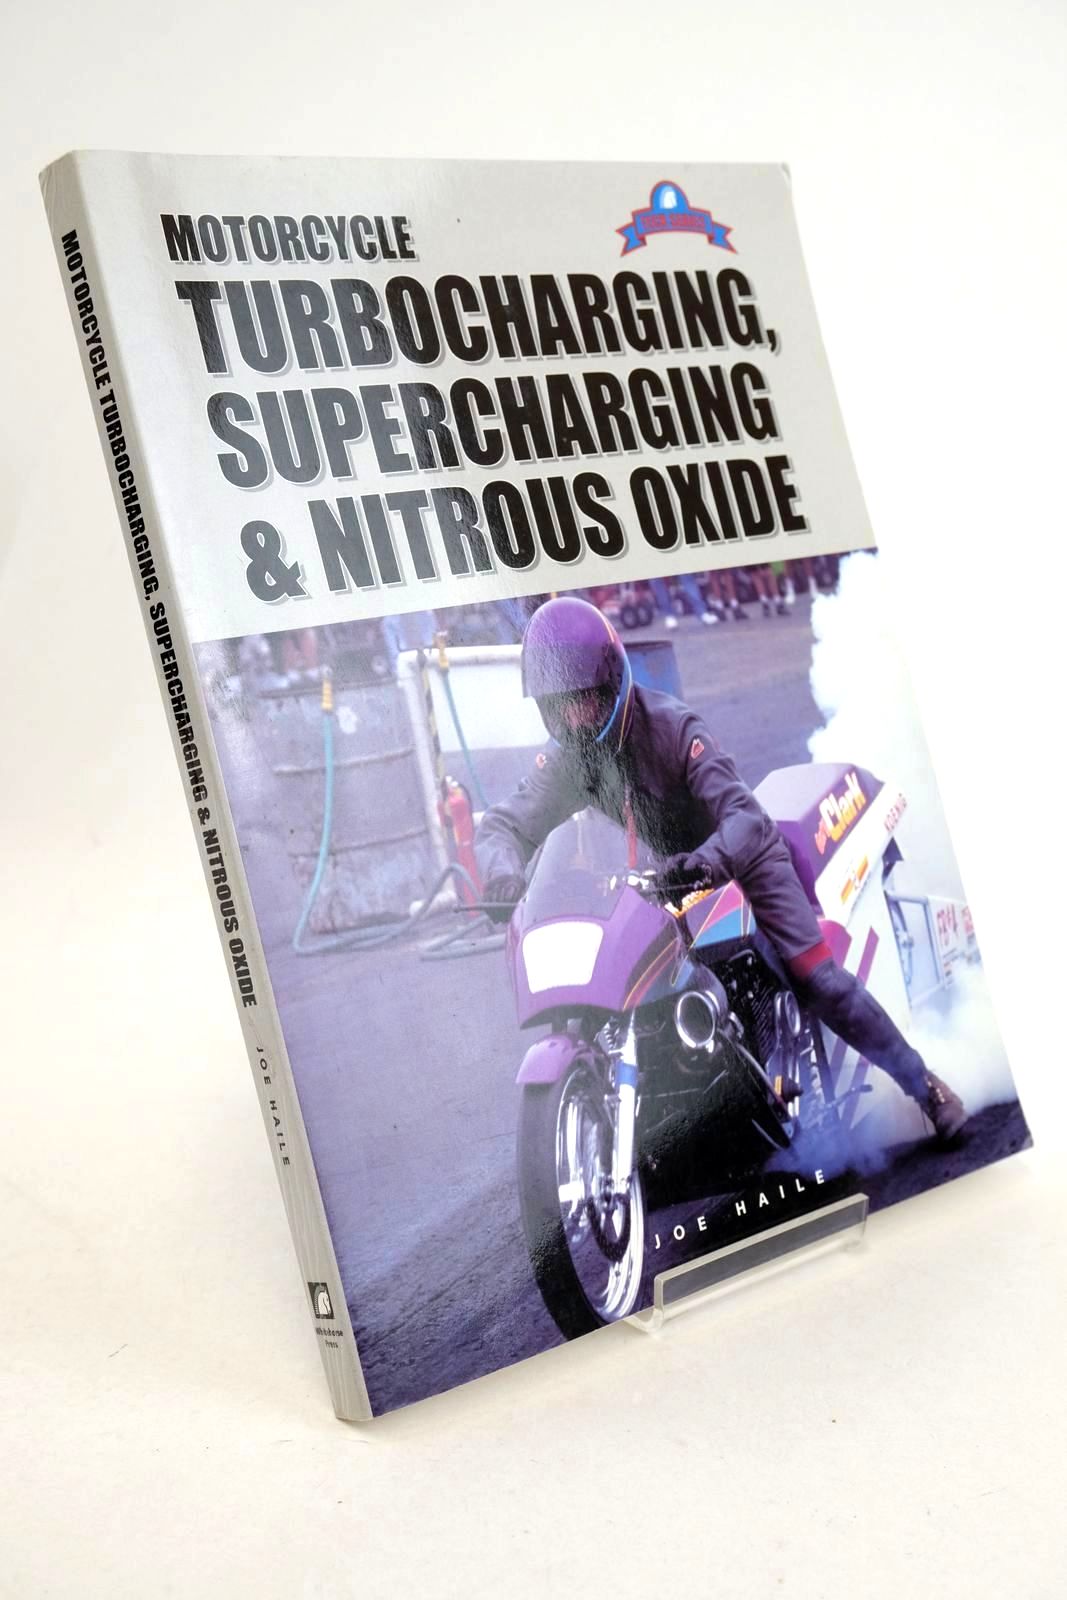 Photo of MOTORCYCLE TURBOCHARGING SUPERCHARGING &AMP; NITROUS OXIDE written by Haile, Joe published by Whitehorse Press (STOCK CODE: 1327276)  for sale by Stella & Rose's Books